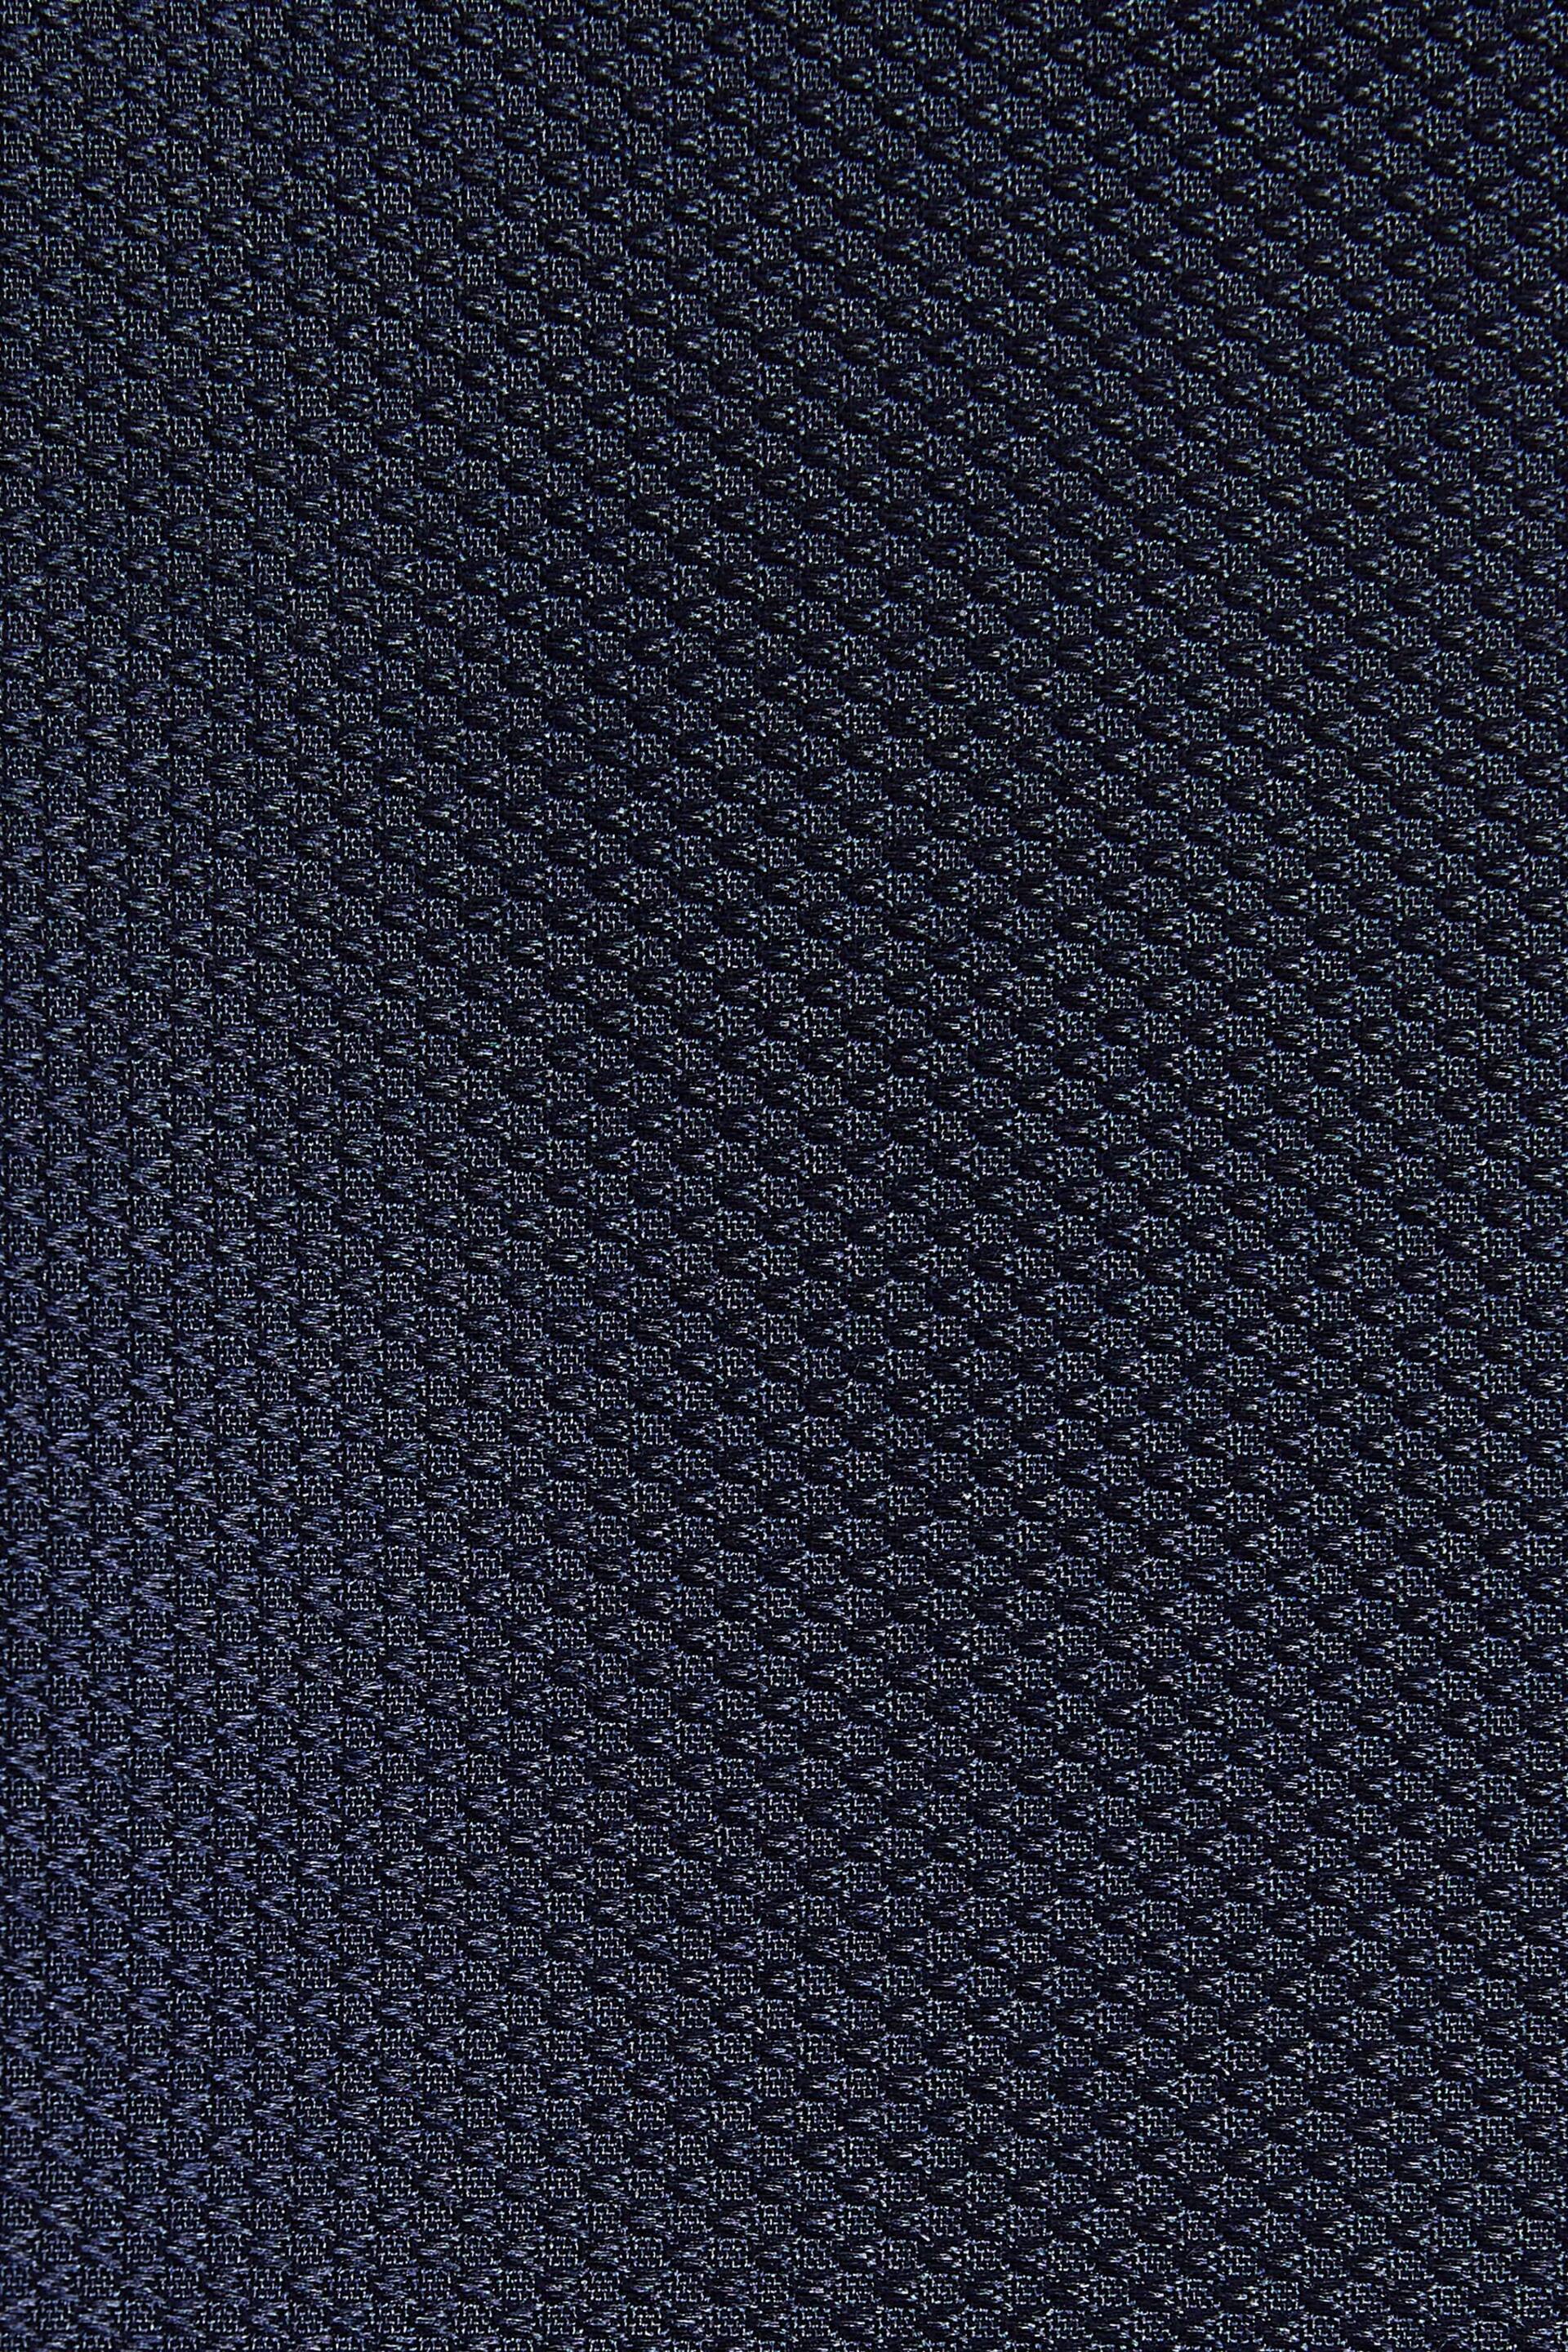 Navy Blue Textured Silk Lapel Pin And Pocket Square Set - Image 3 of 3